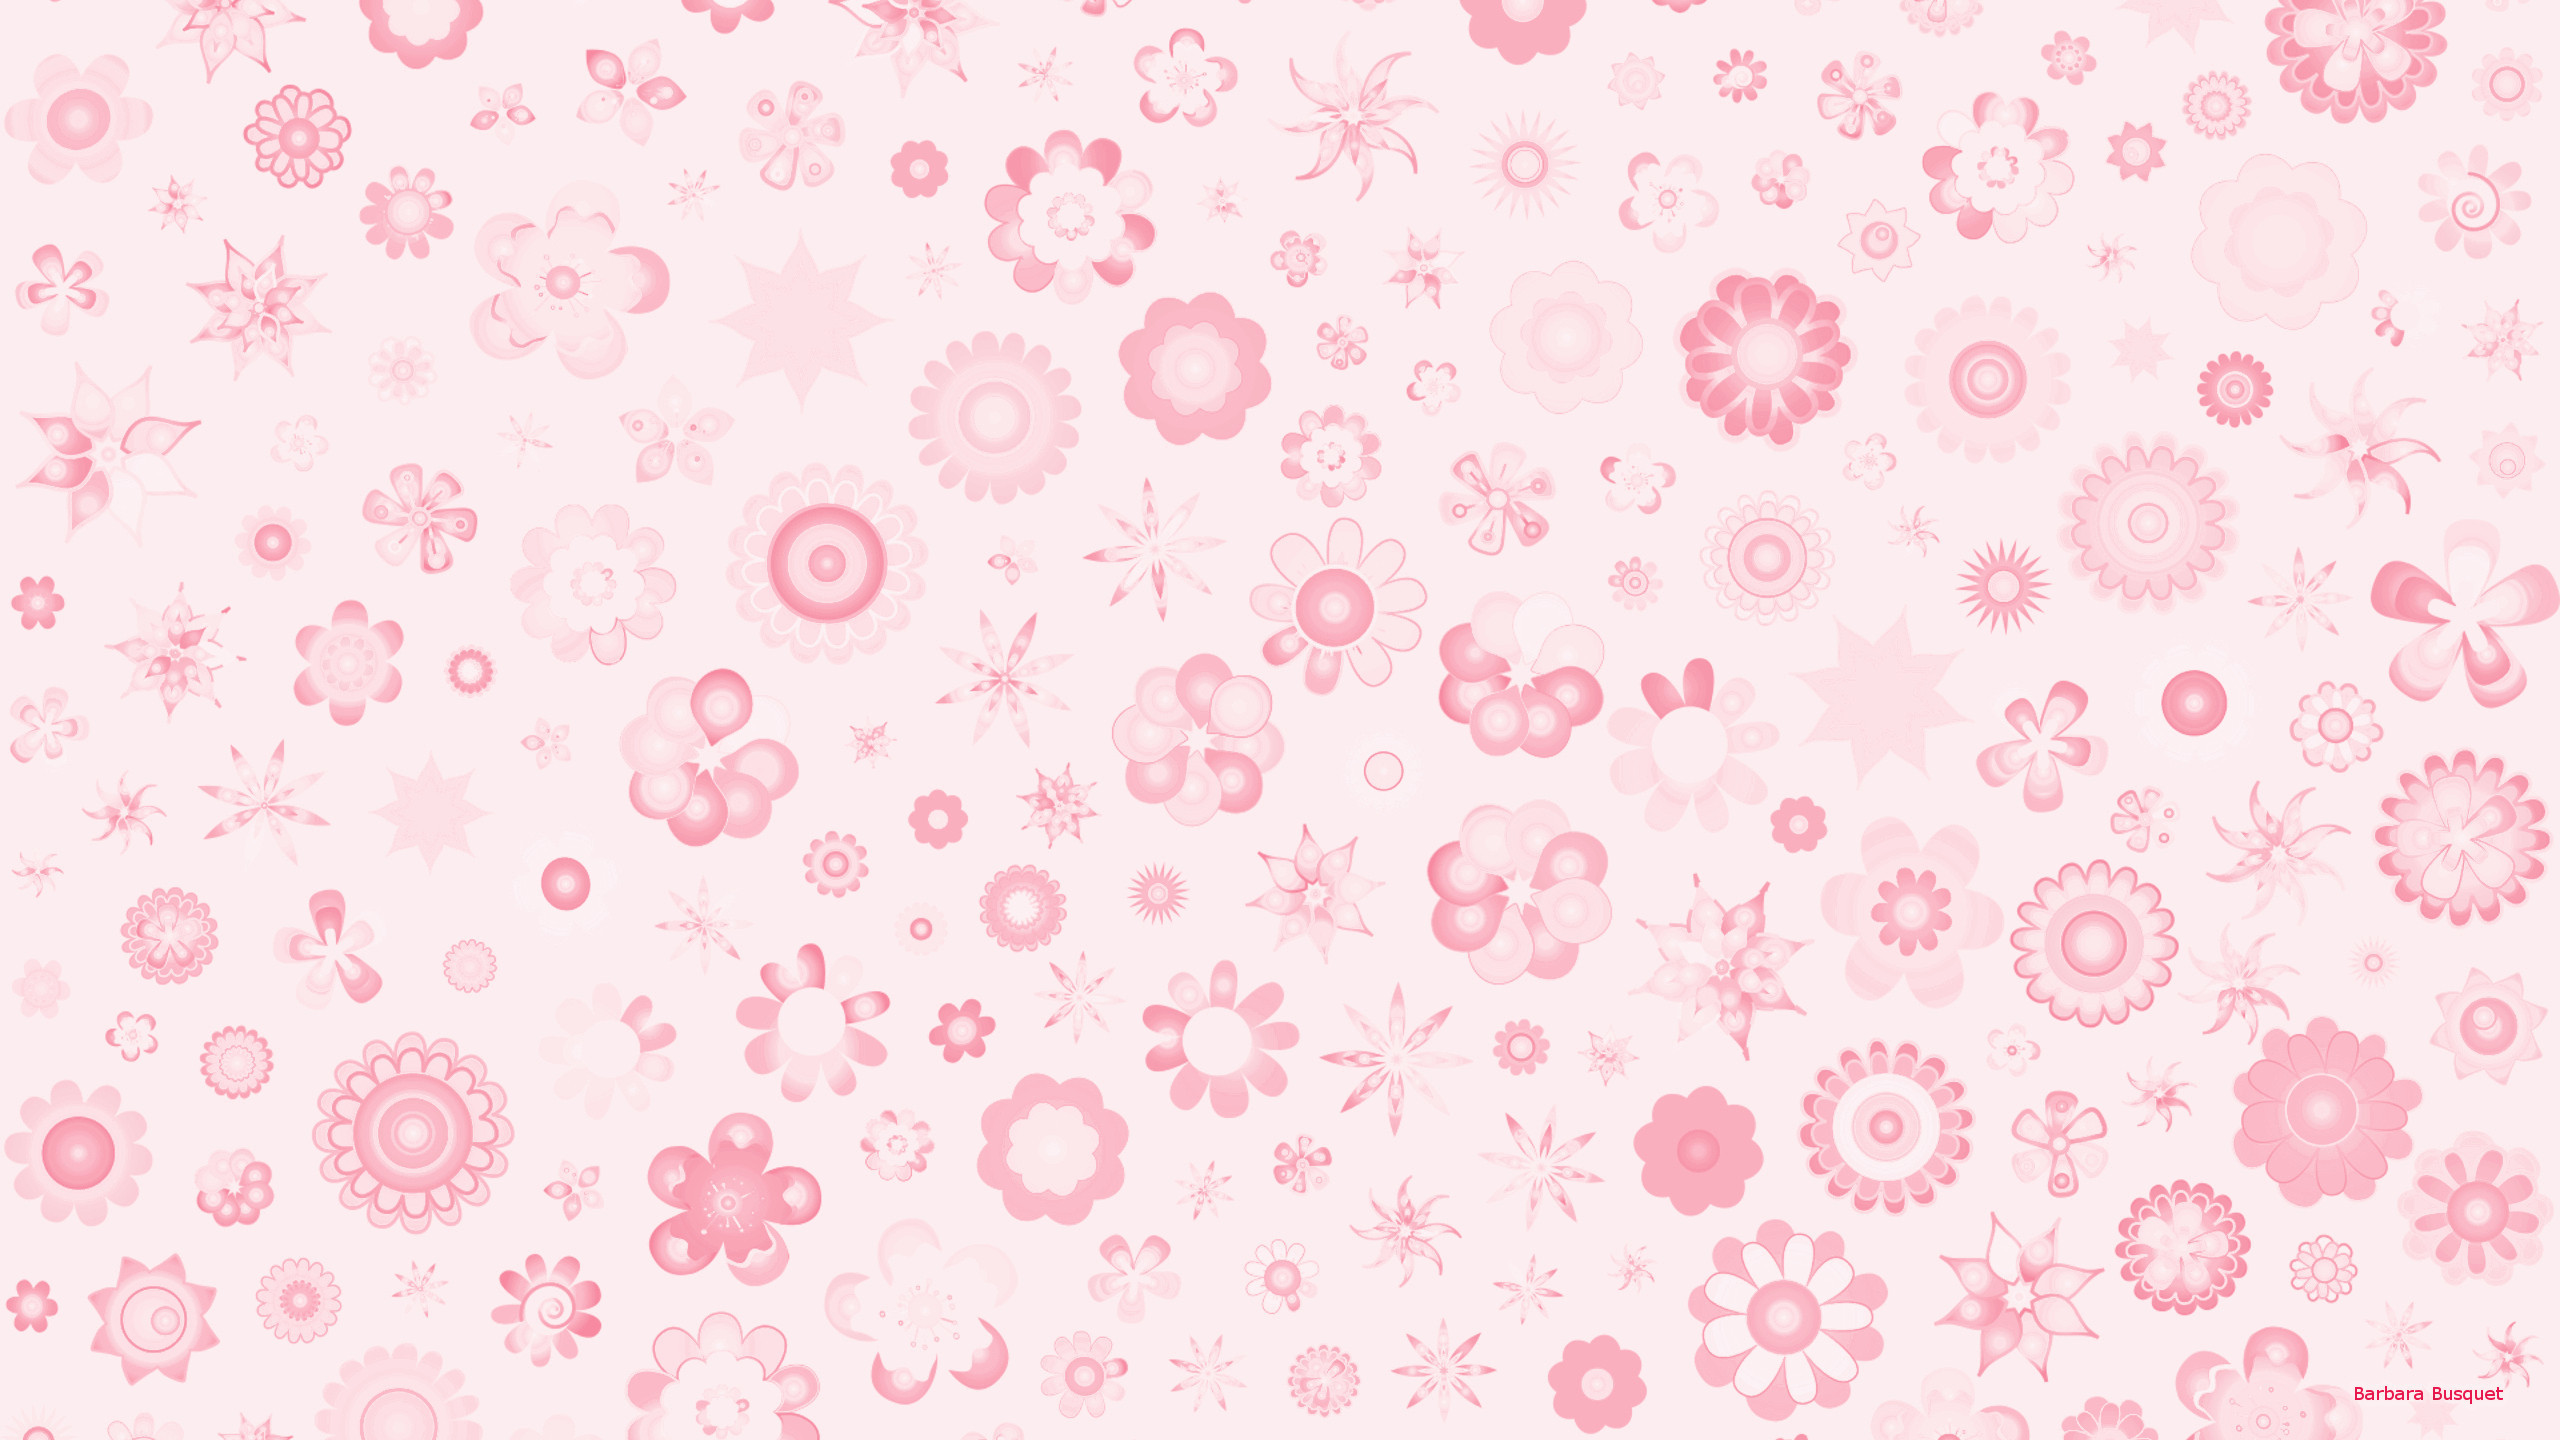 2560x1440 Light pink wallpaper with flowers.